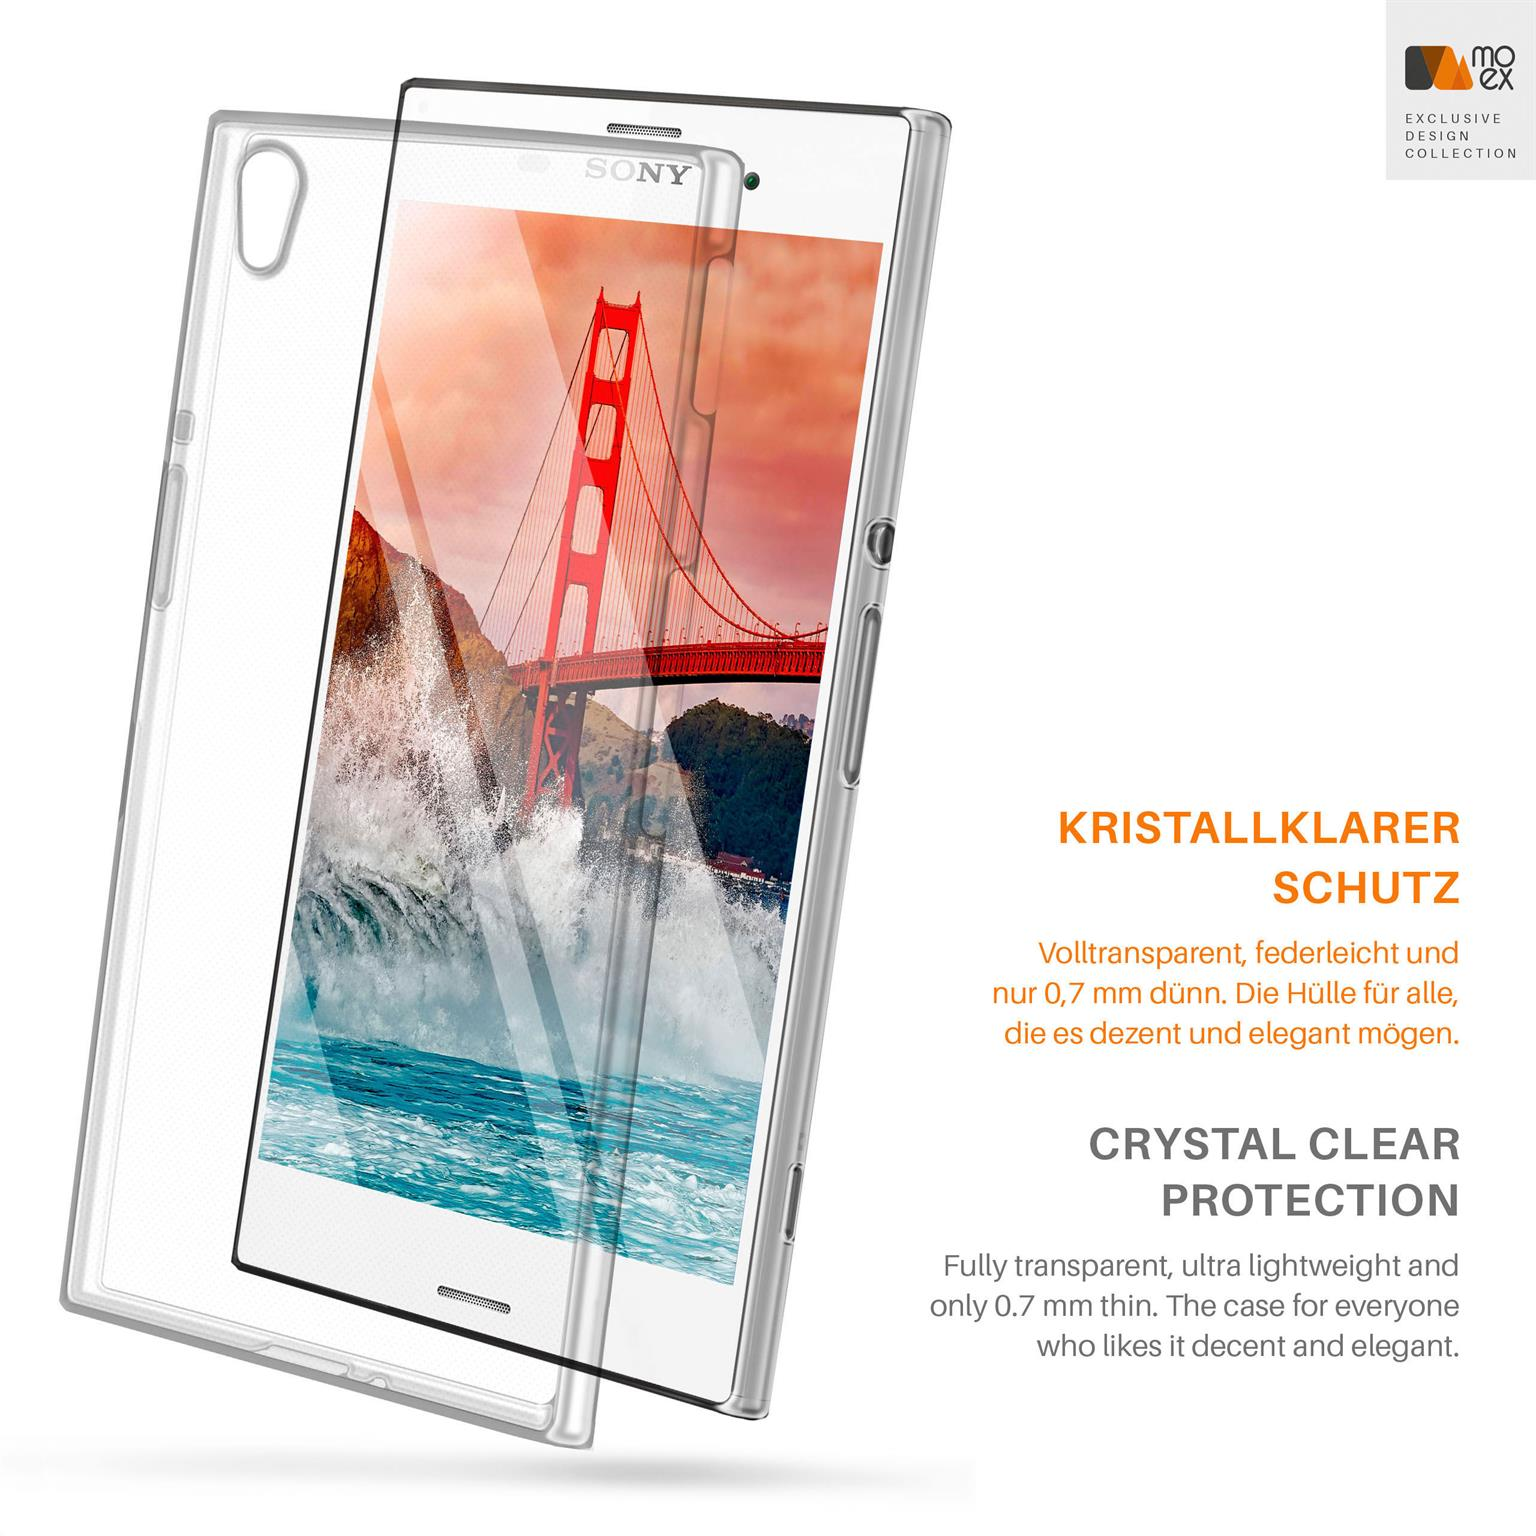 MOEX Aero Case, Backcover, Sony, Z1, Crystal-Clear Xperia